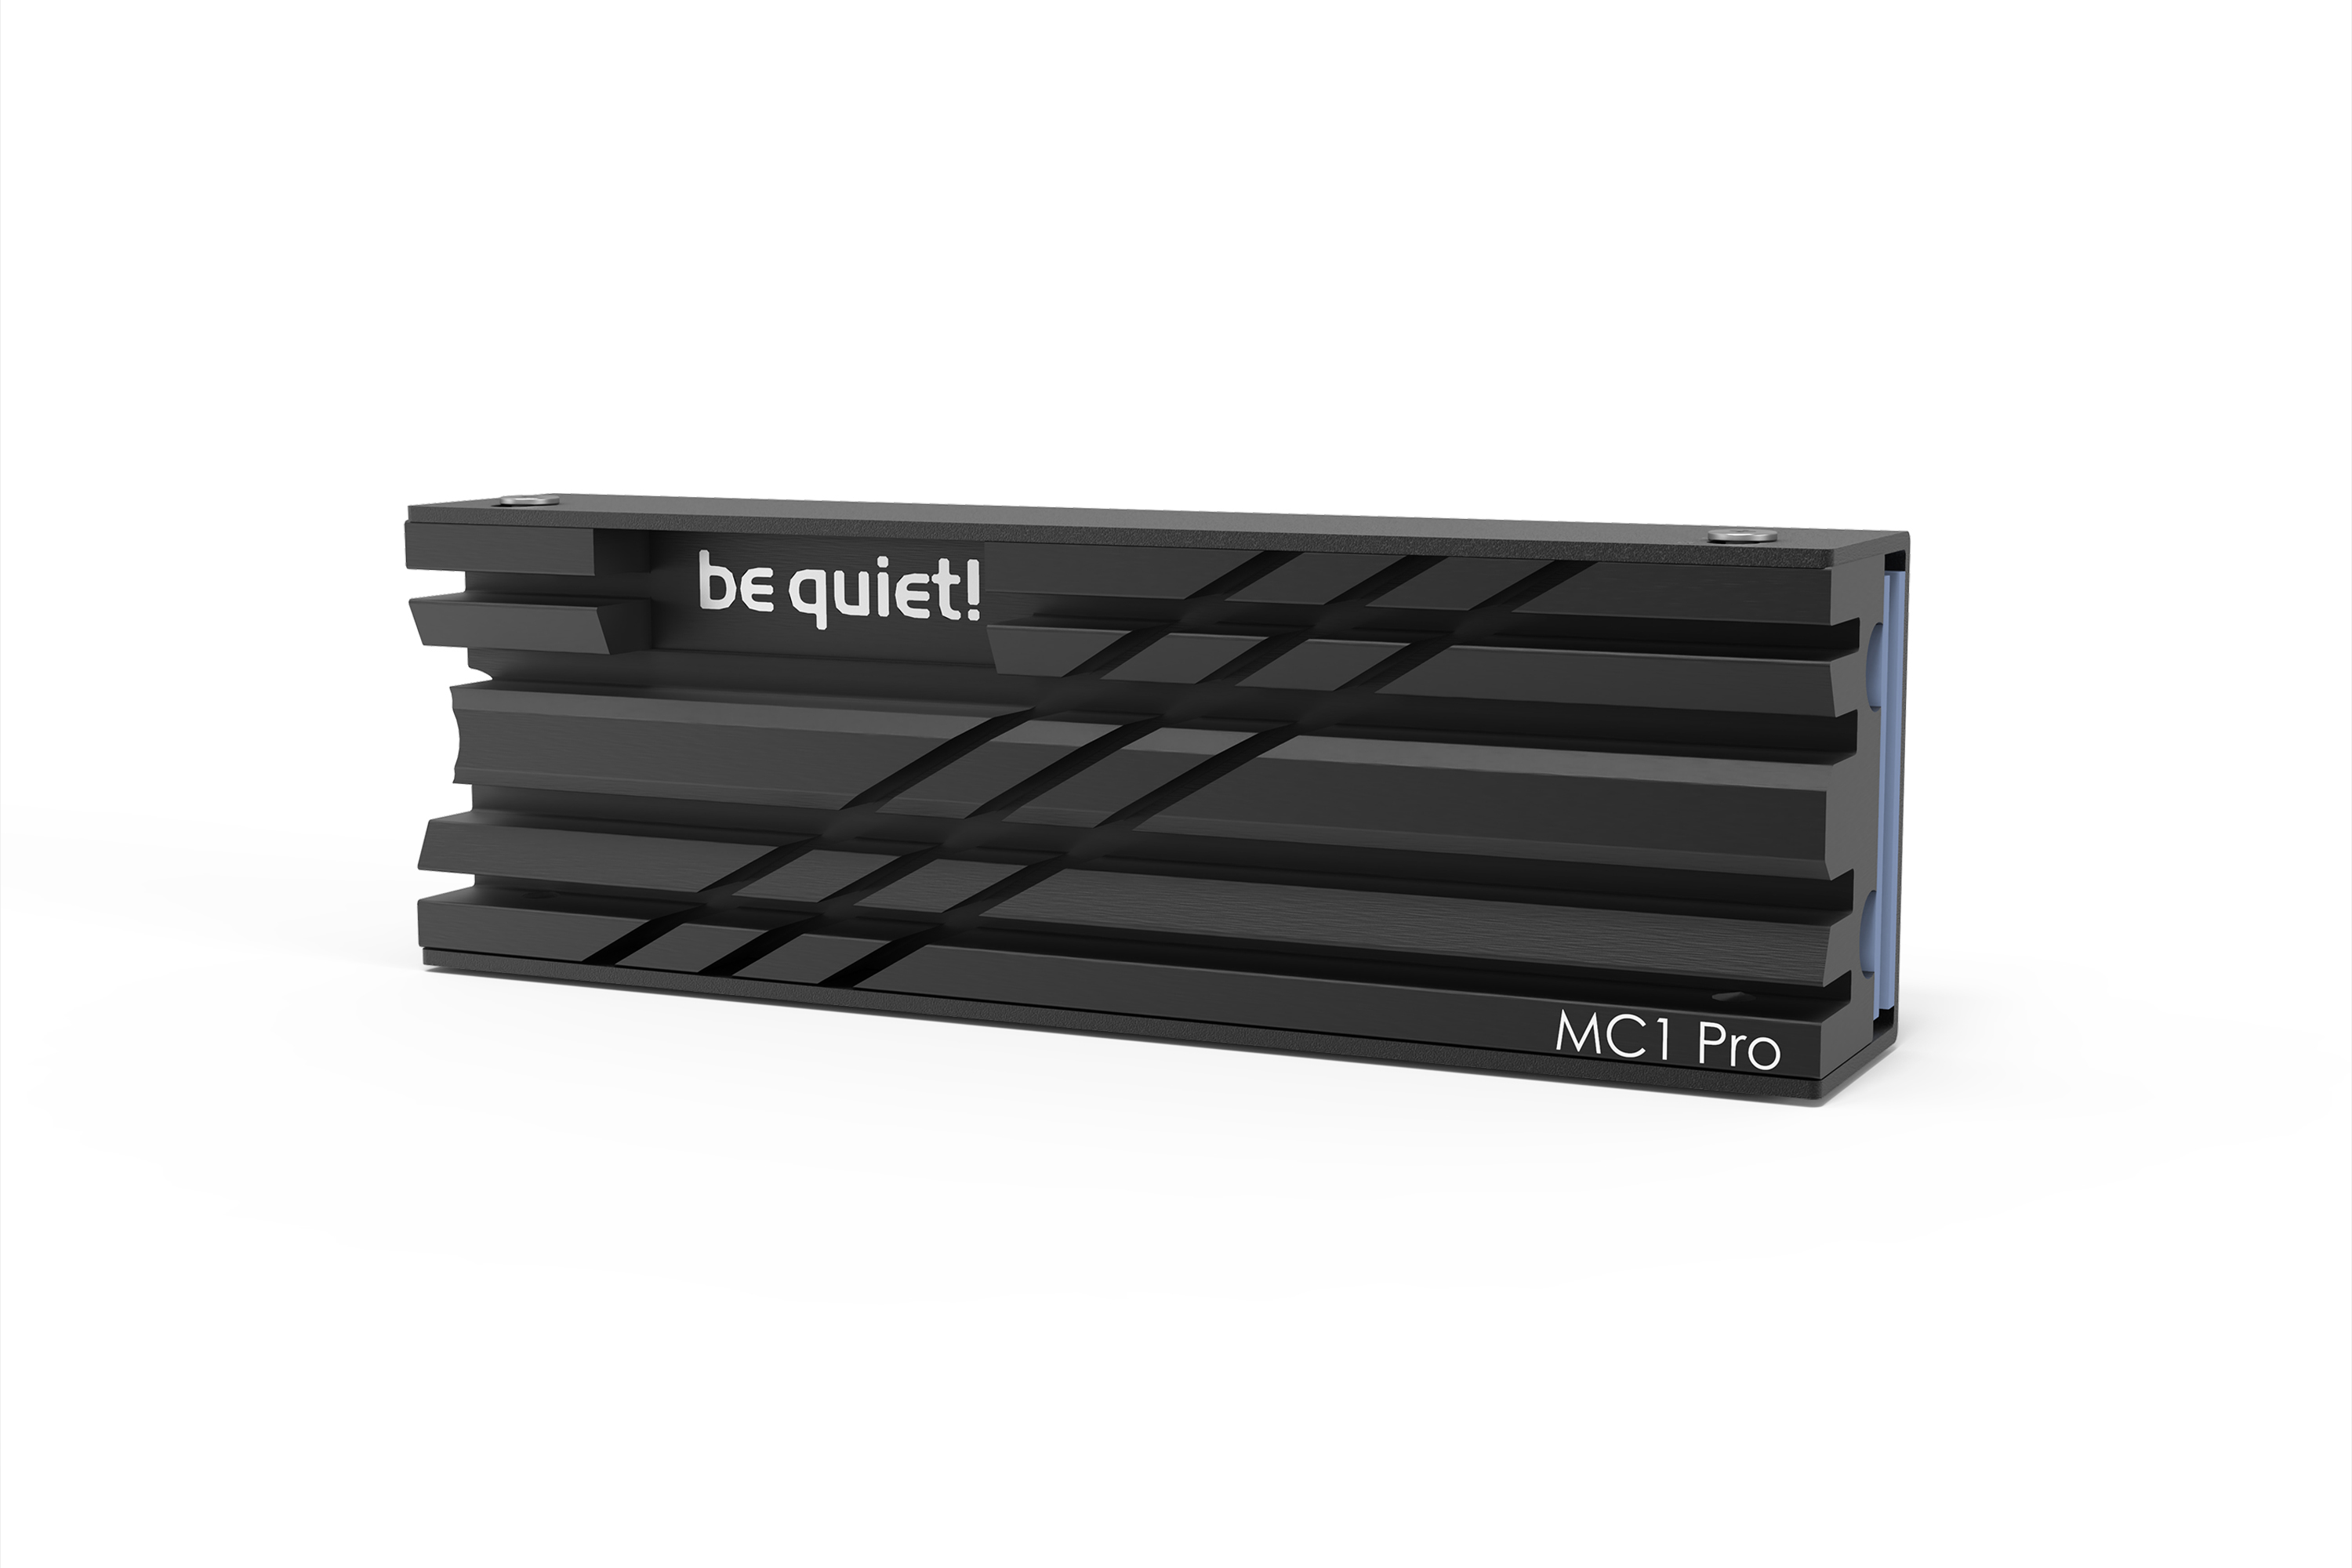 be quiet! MC1 PRO M.2 SSD Cooler, for single and double sided 2280 SSD, with integrated heatpipe